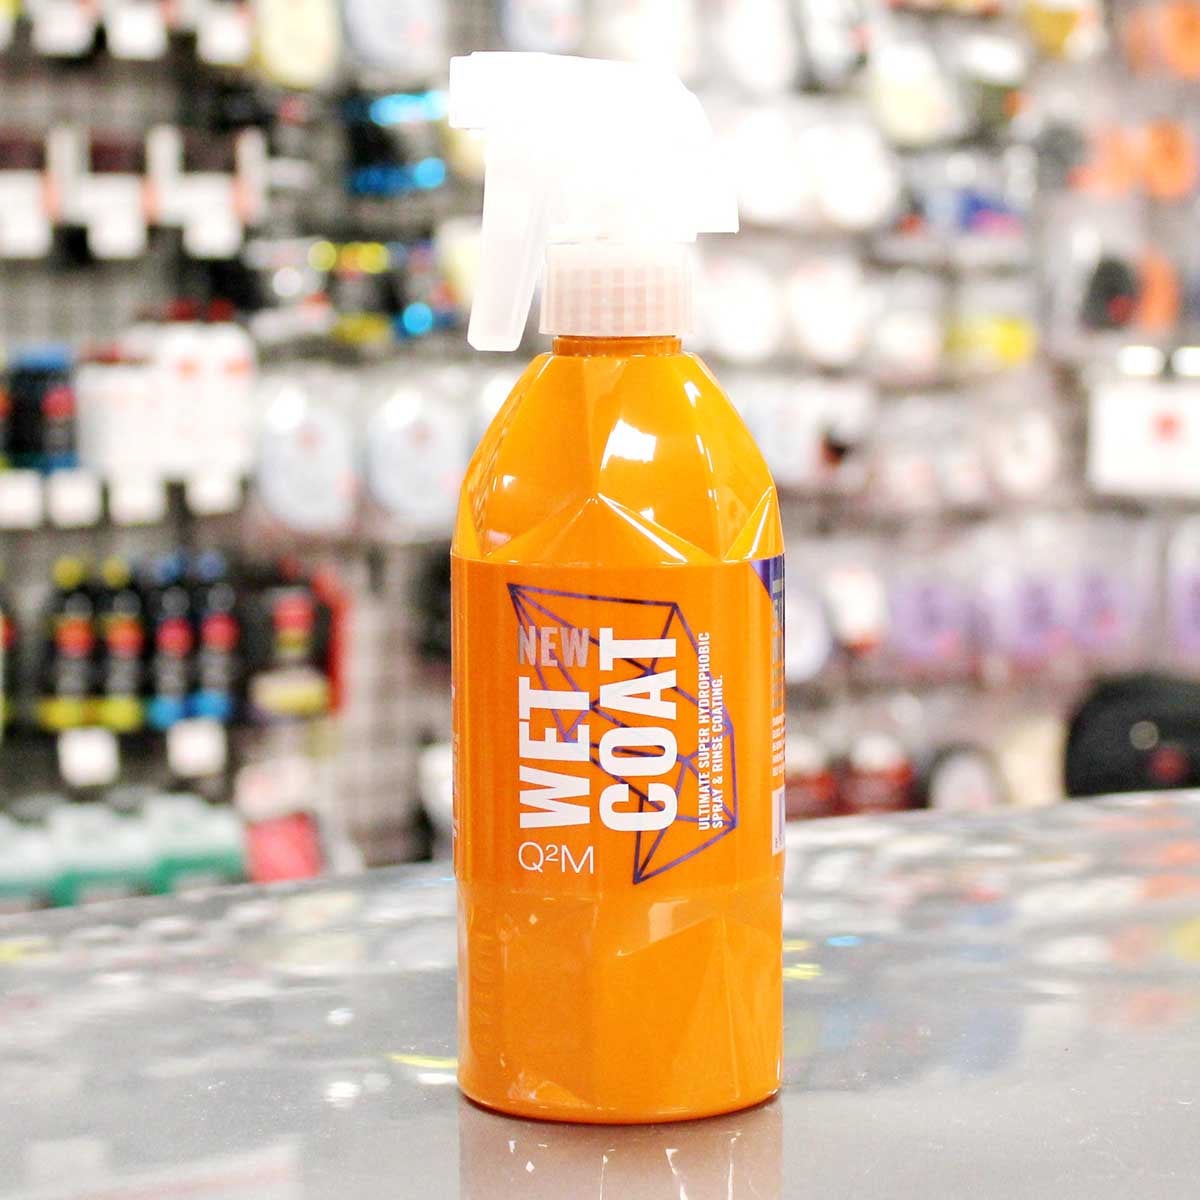  GYEON quartz Wet Coat (500ml) - Hydrophobic Silica Spray Coating  - Easy Gloss and Protection-Safe on all Exterior Surfaces : Automotive